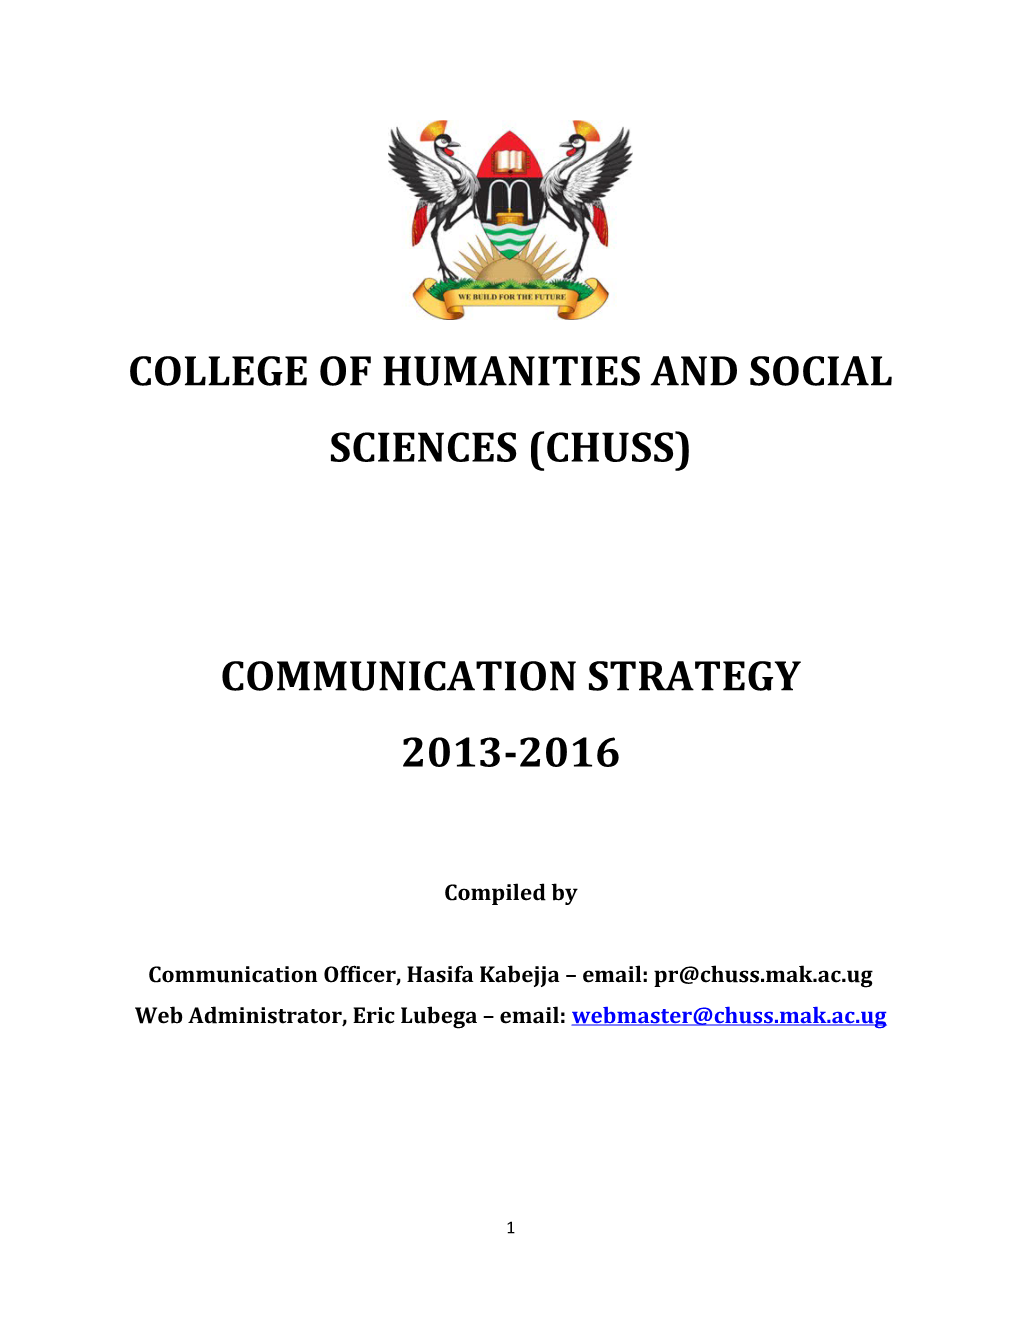 College of Humanities and Social Sciences (Chuss)